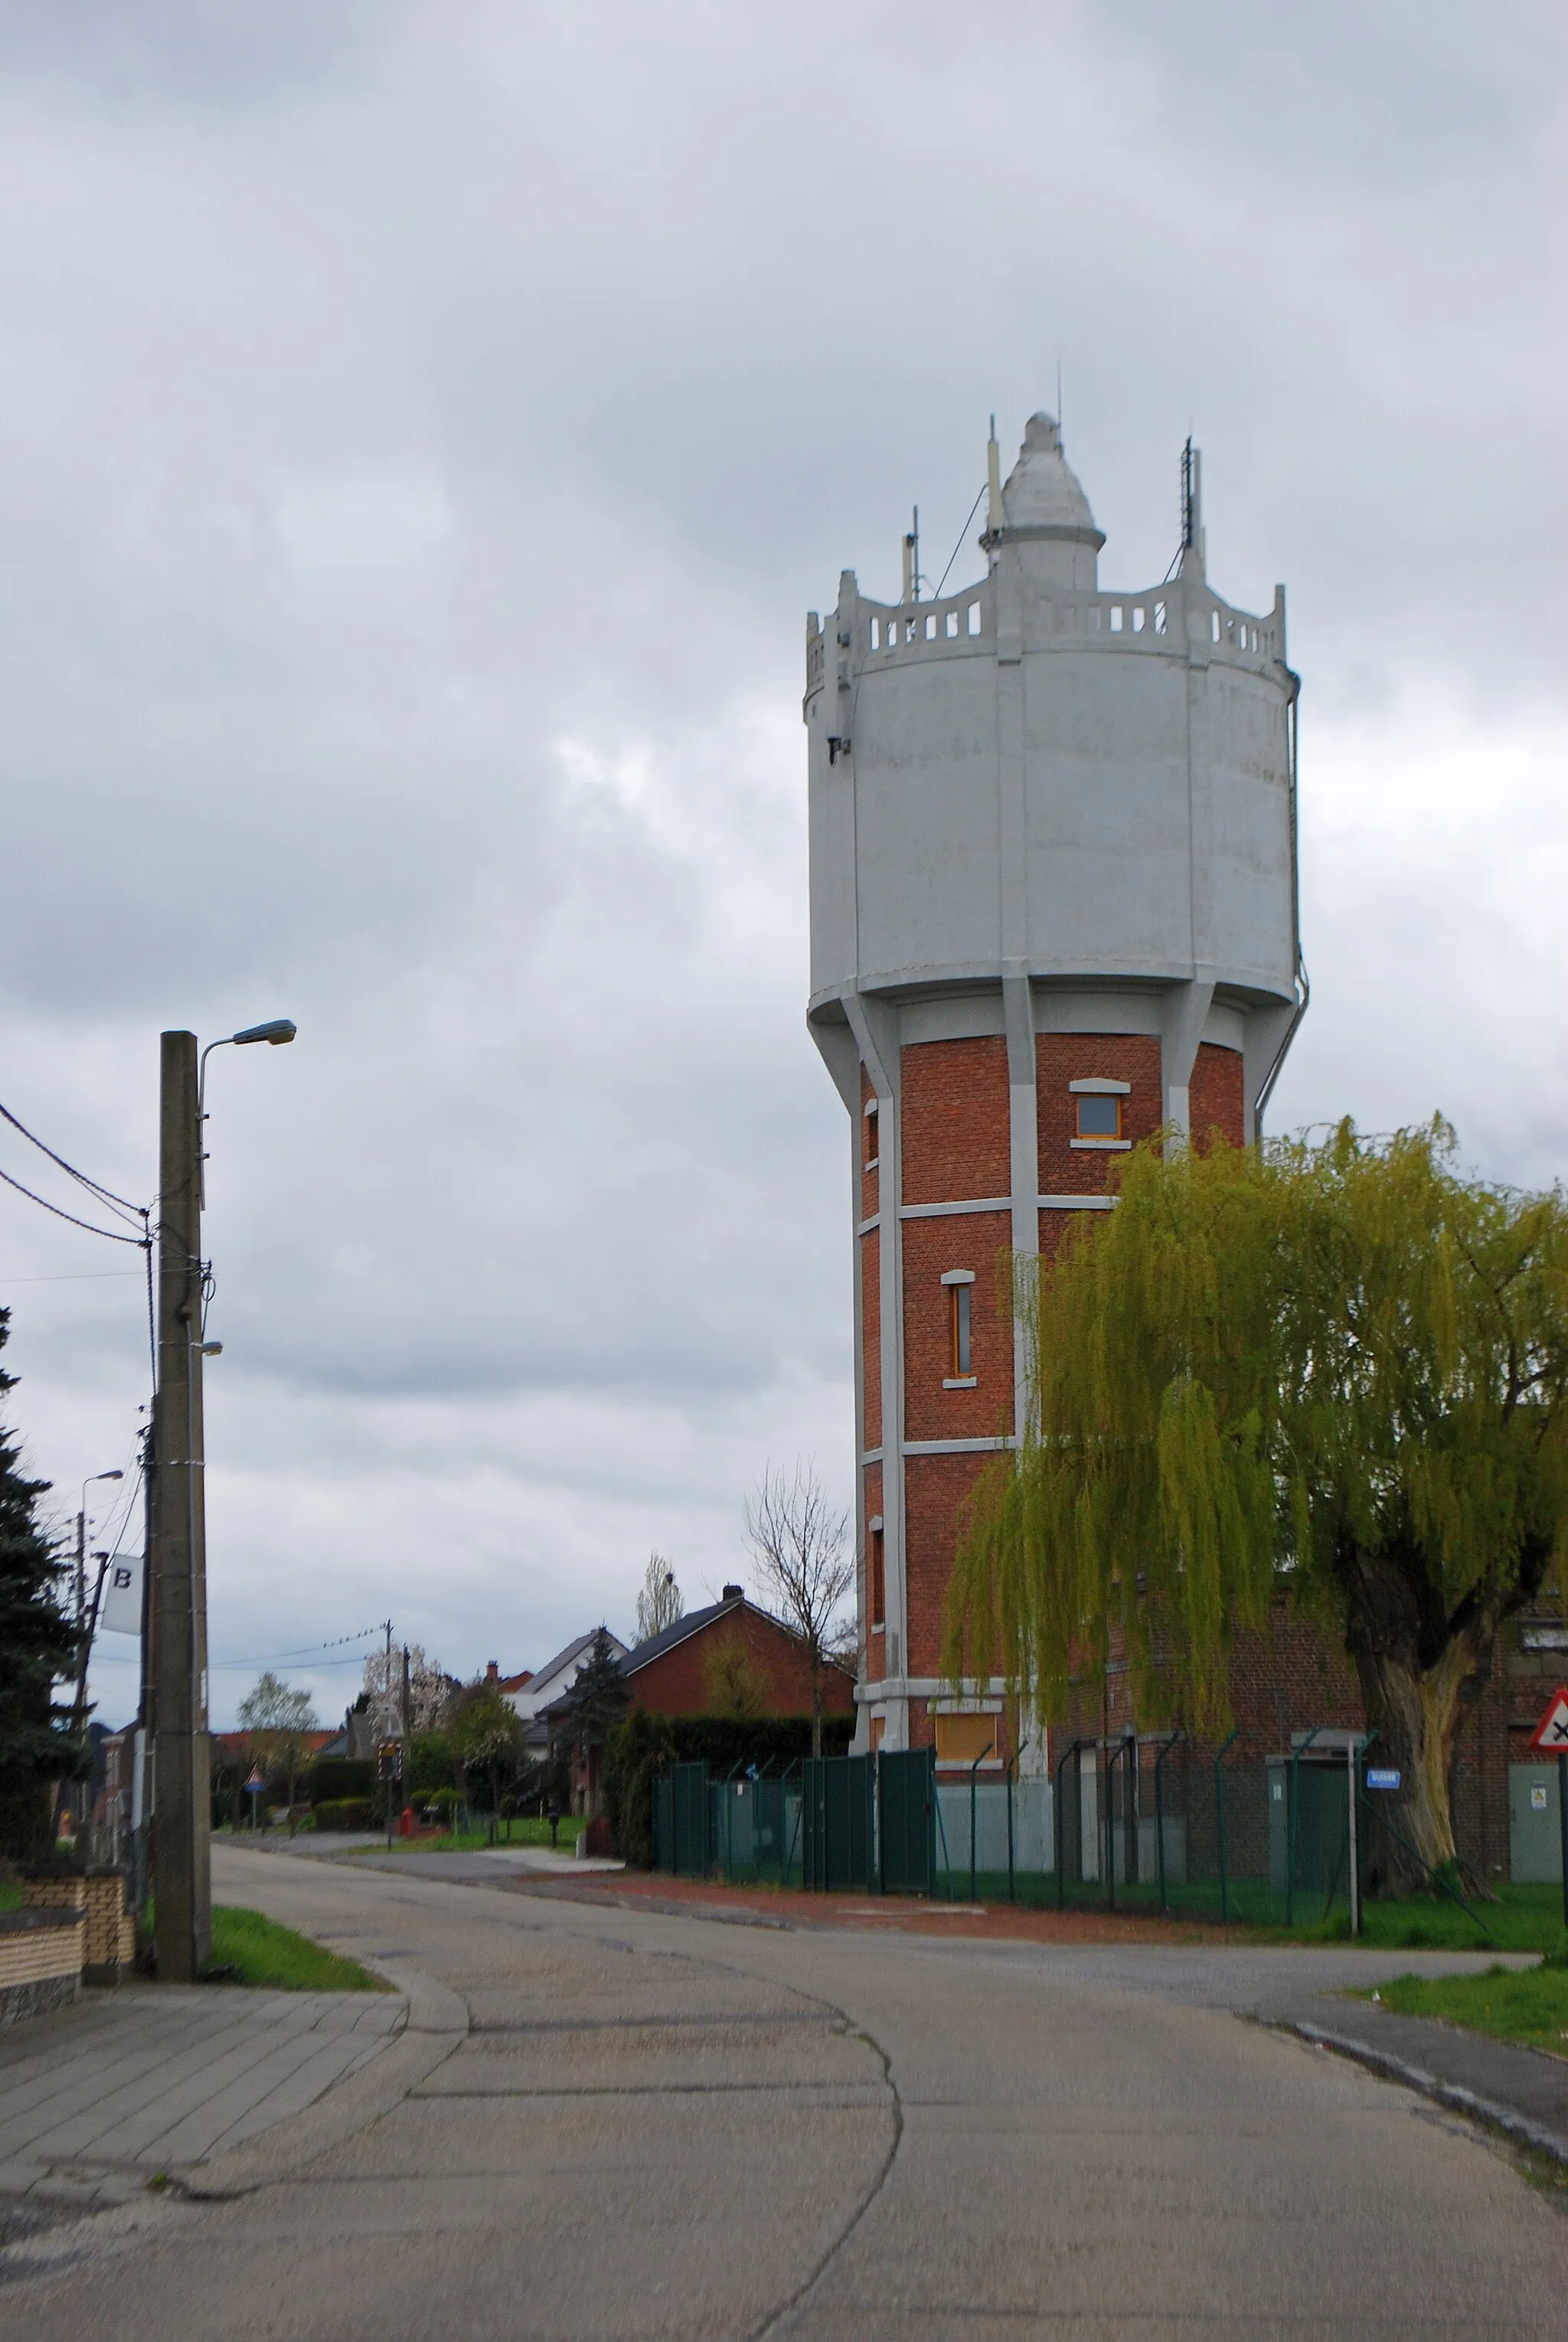 Photo showing: The water tower of Othée, which is a district of Awans in province of Liège (Belgium).